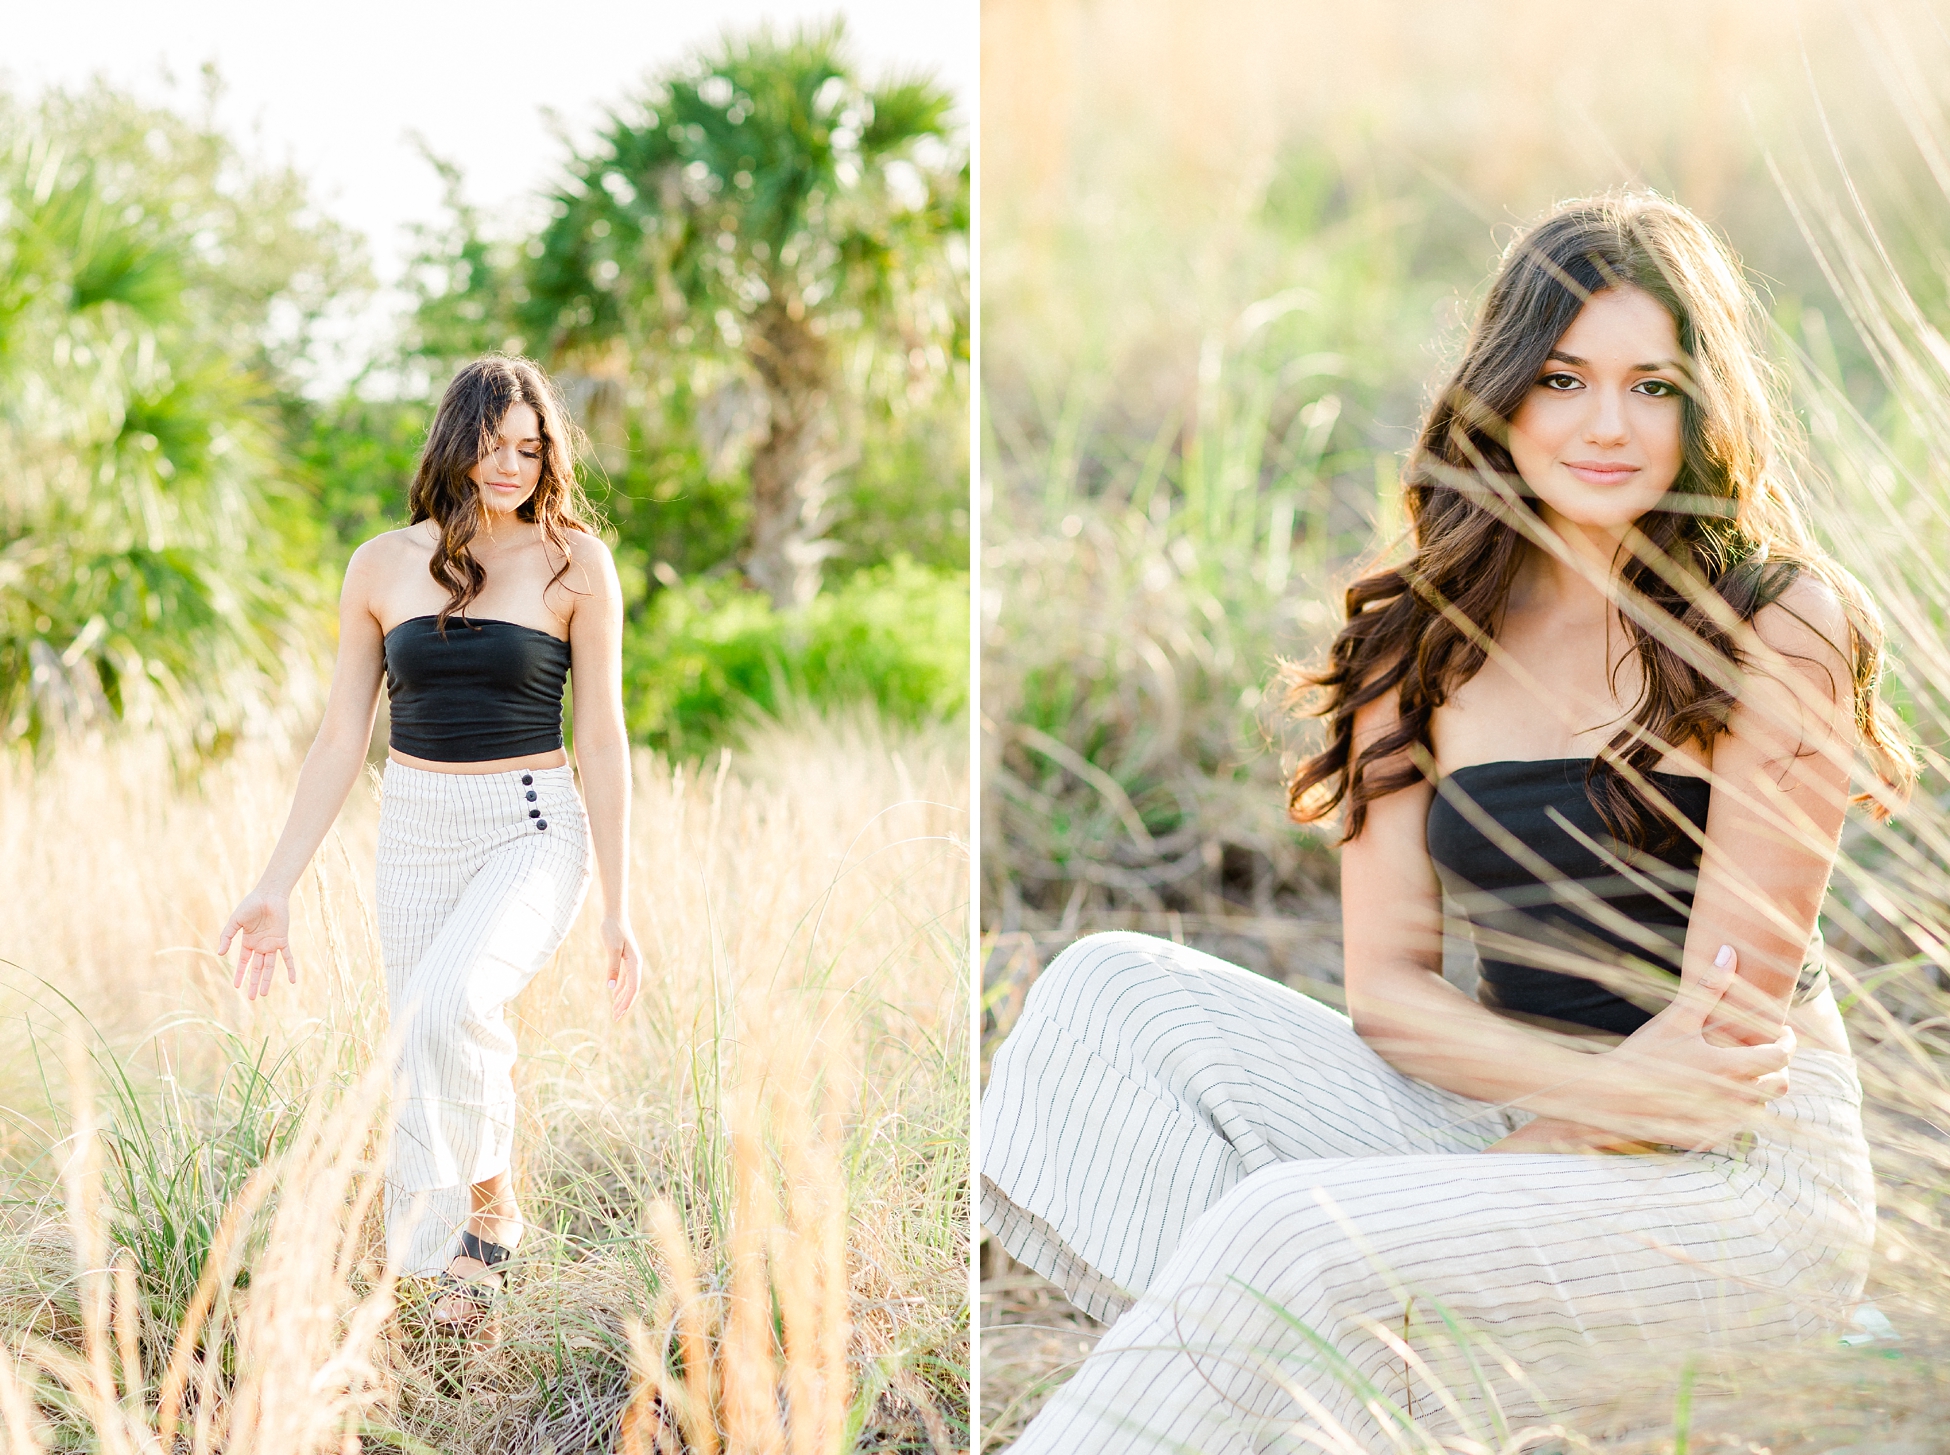 Tampa Senior photographer | © Ailyn La Torre Photography 2018